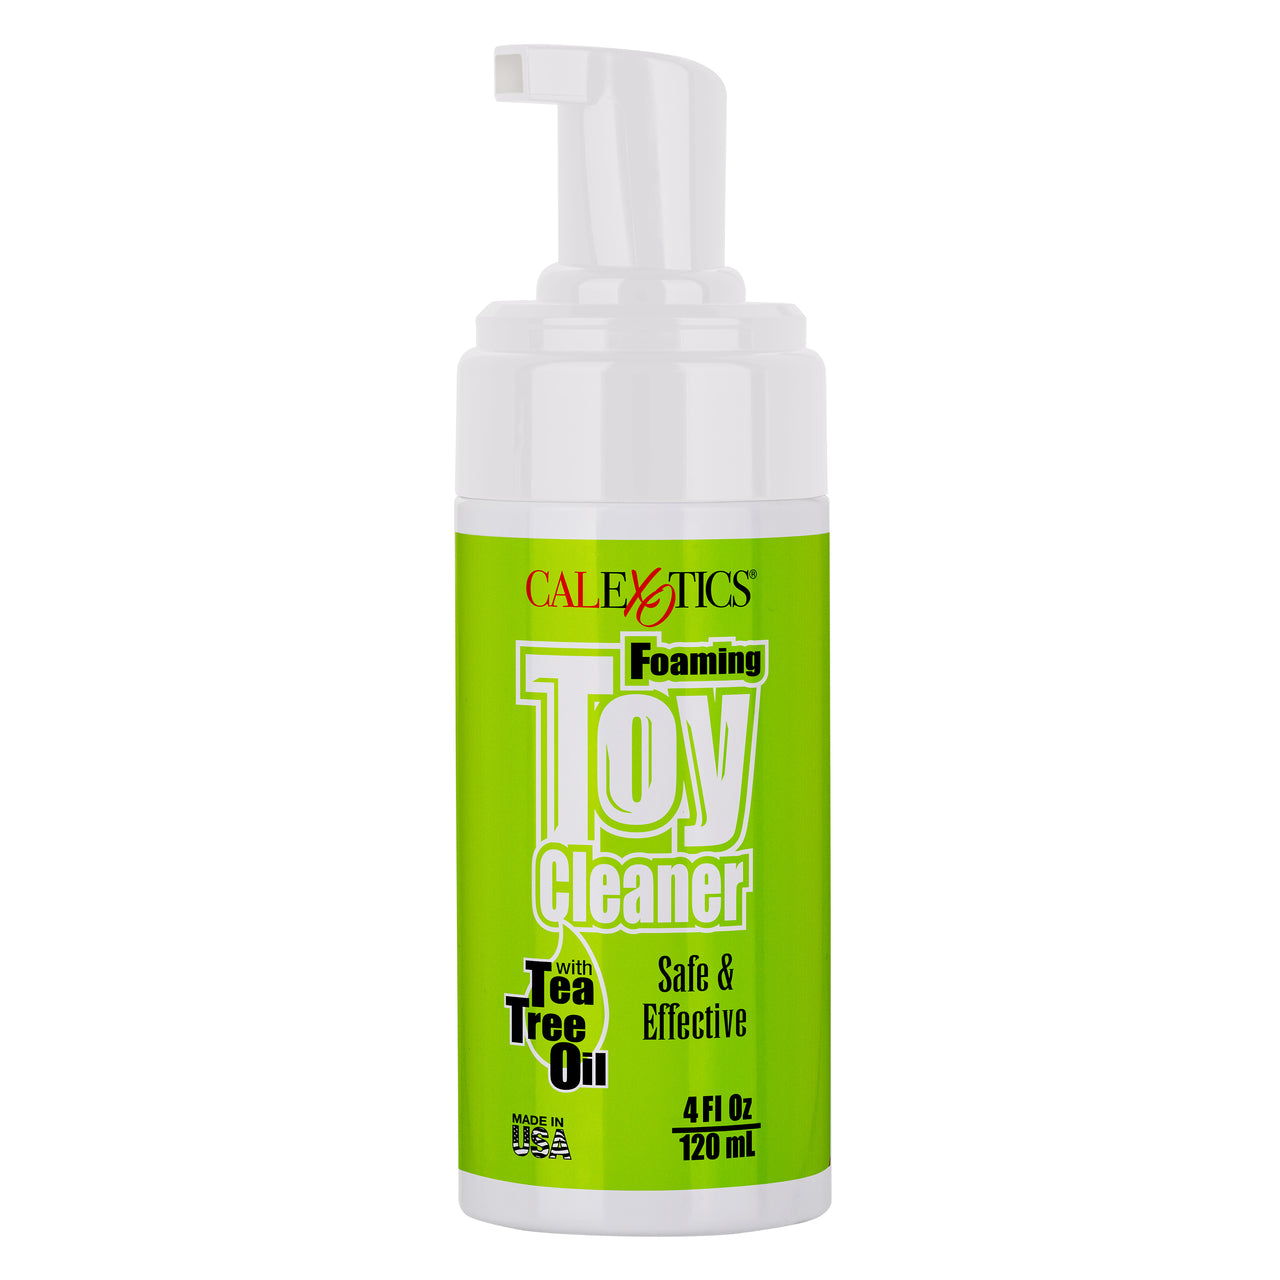 CalExotics Foaming Toy Cleaner with Tea Tree Oil 4 fl. oz.